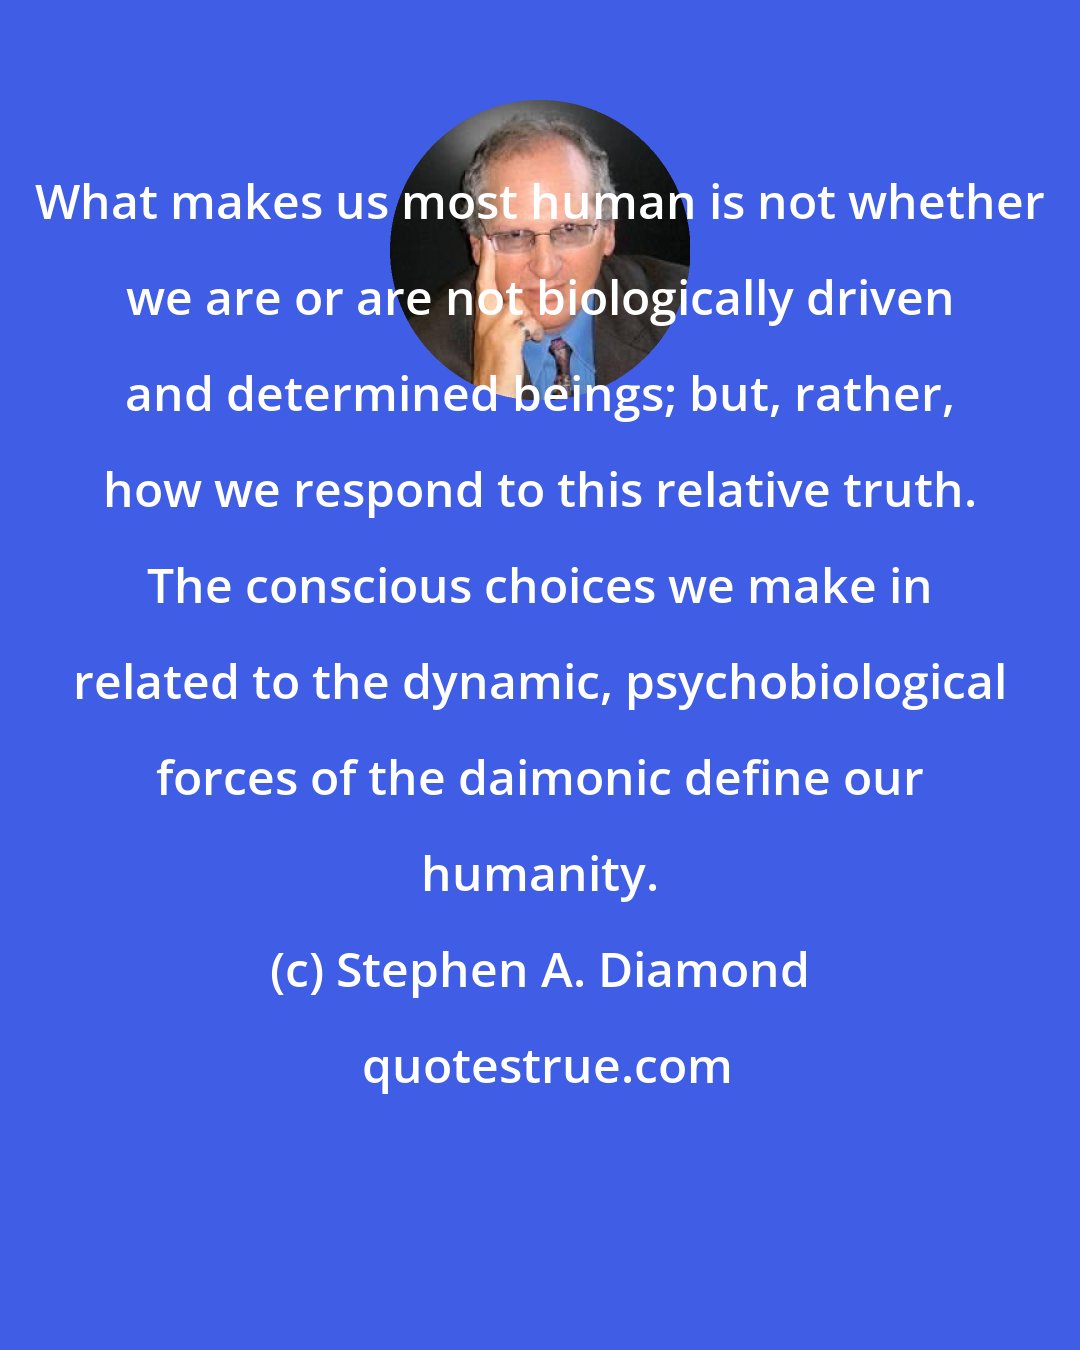 Stephen A. Diamond: What makes us most human is not whether we are or are not biologically driven and determined beings; but, rather, how we respond to this relative truth. The conscious choices we make in related to the dynamic, psychobiological forces of the daimonic define our humanity.